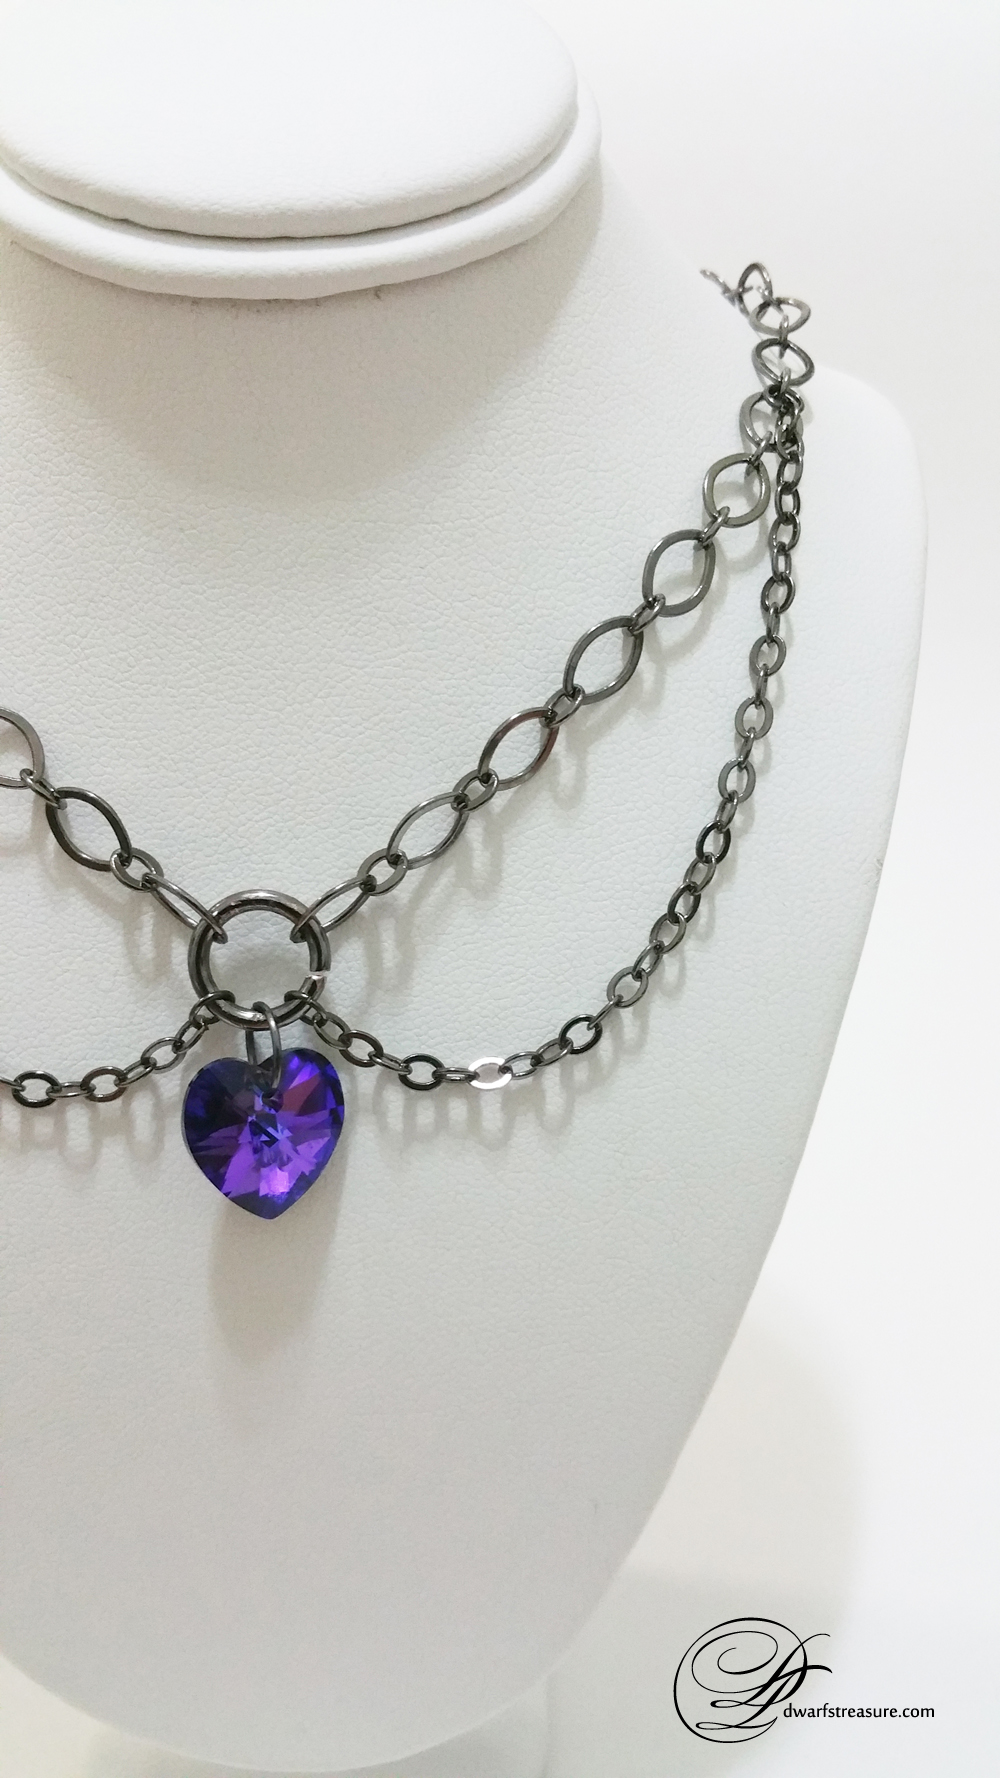 hot gunmetal double chain necklace with purple heart charm